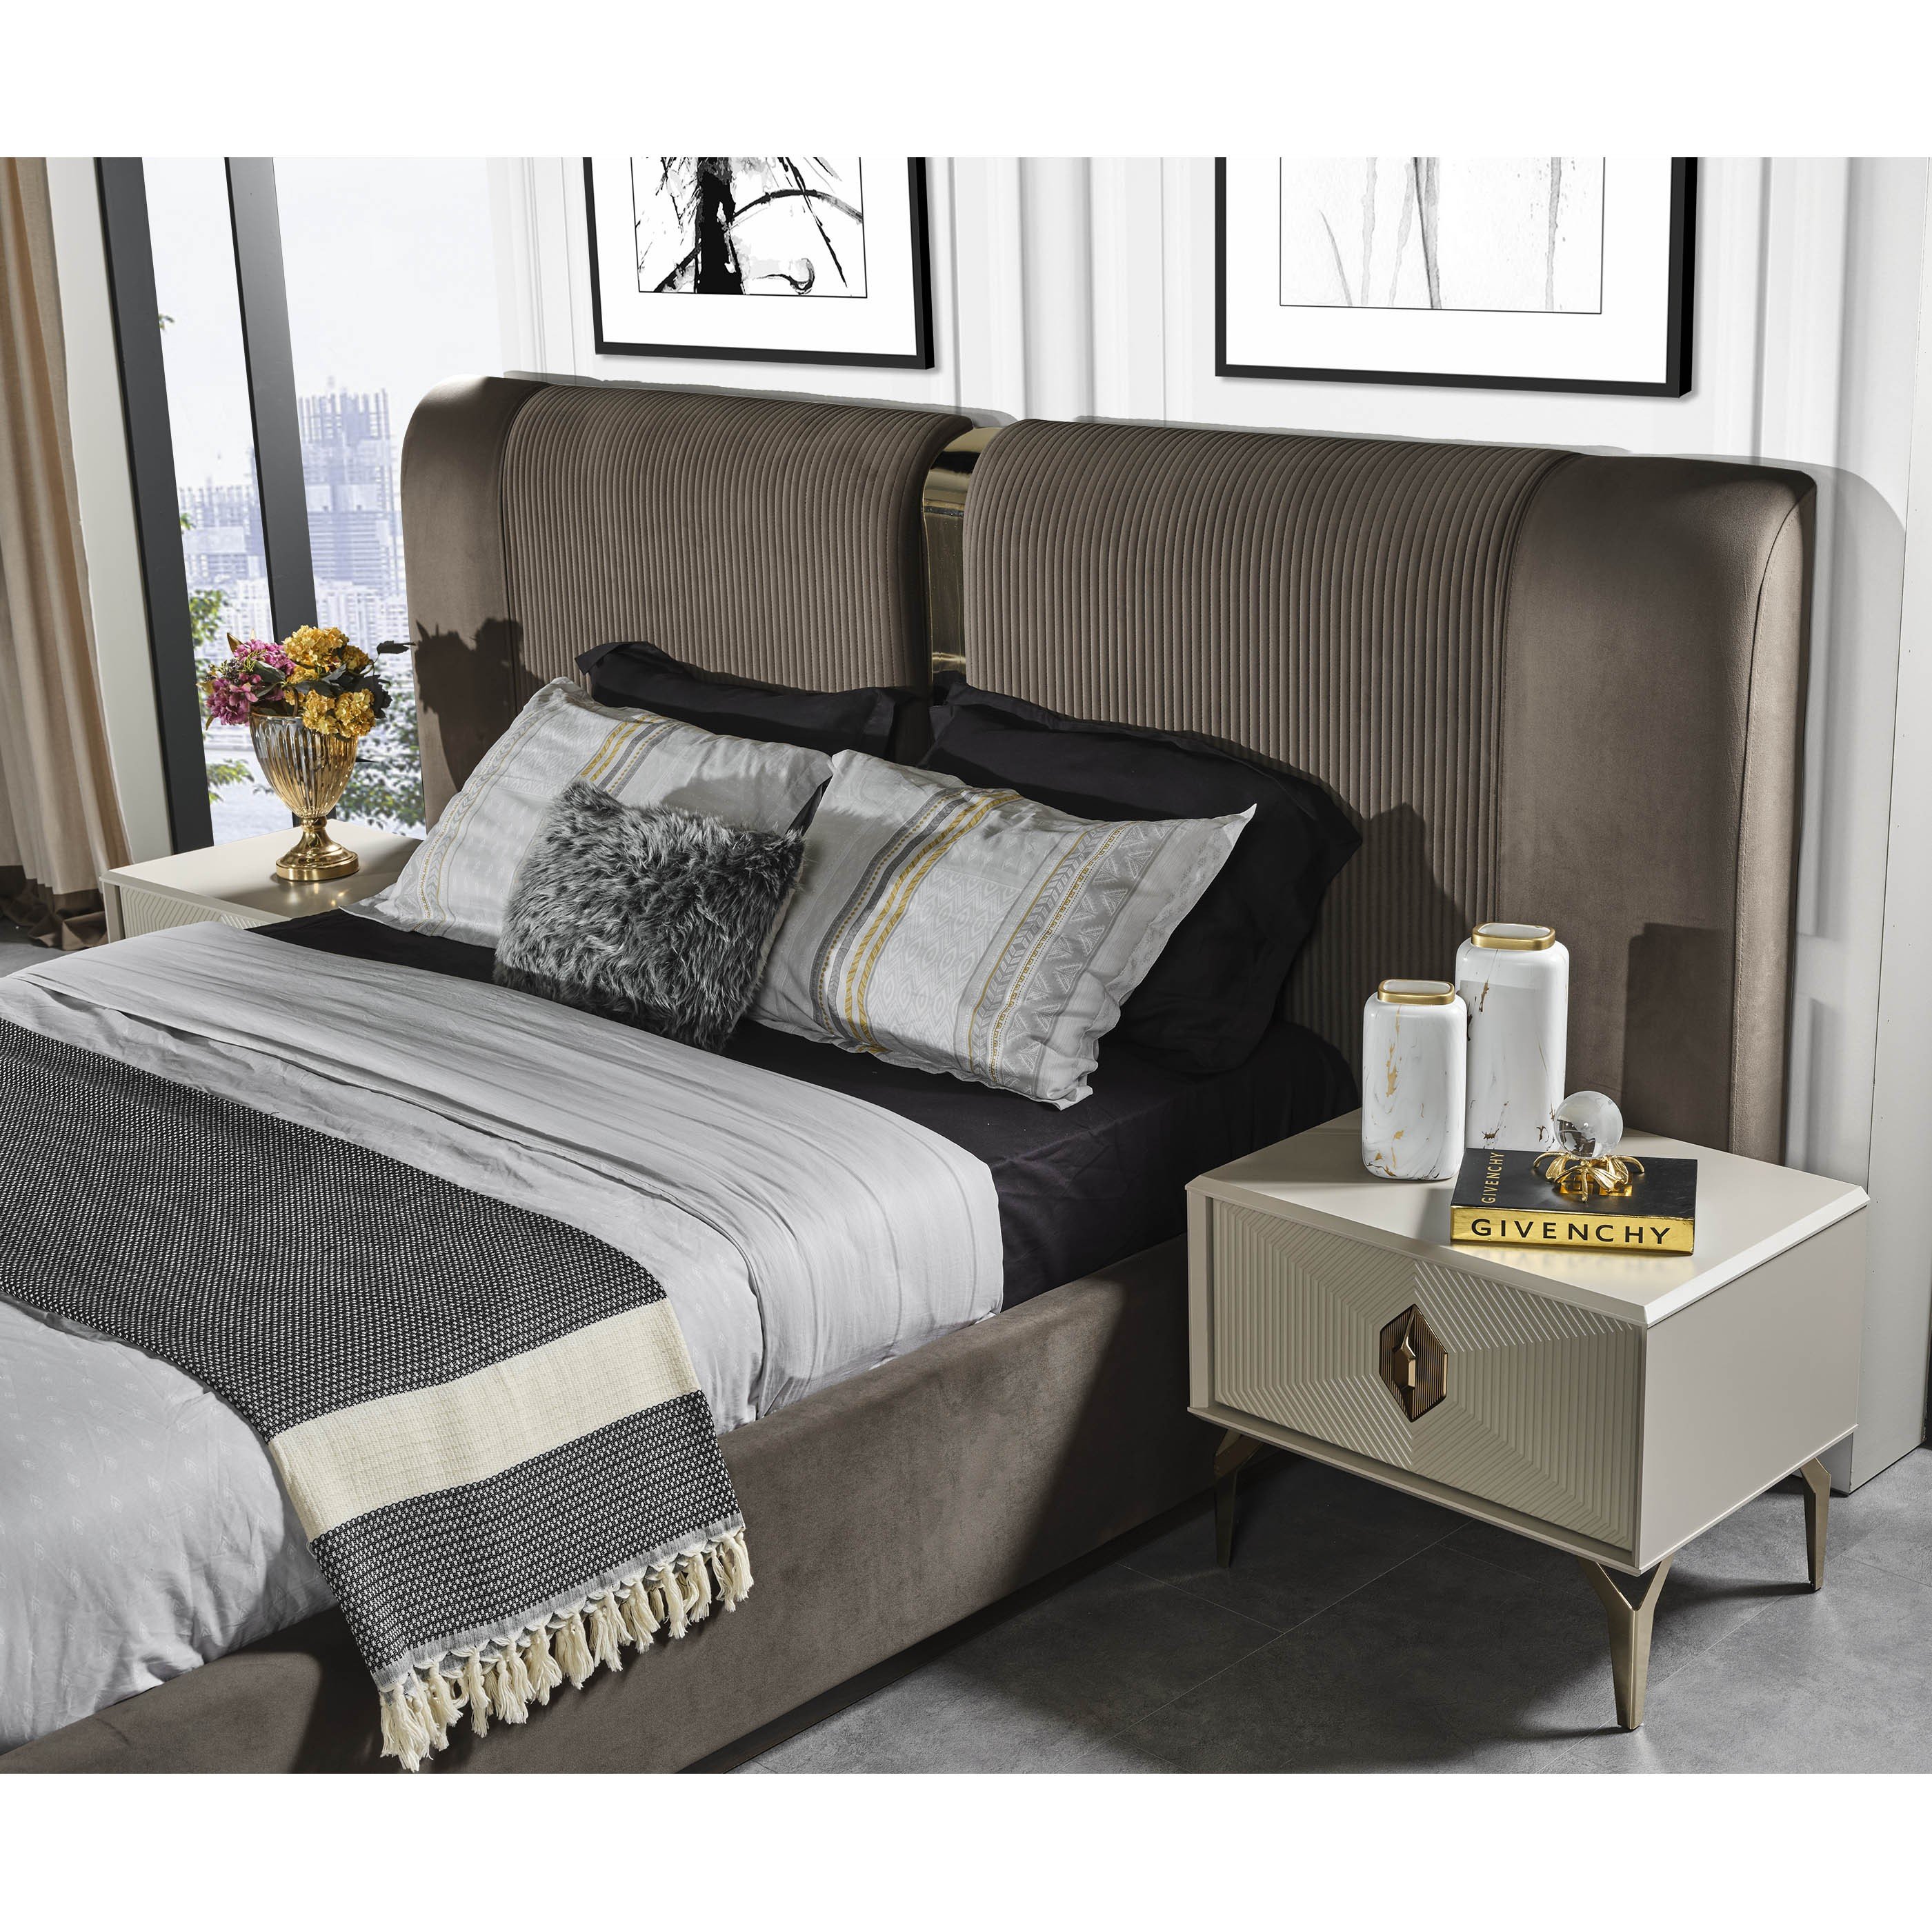 Trend Bed With Storage 160x200 cm